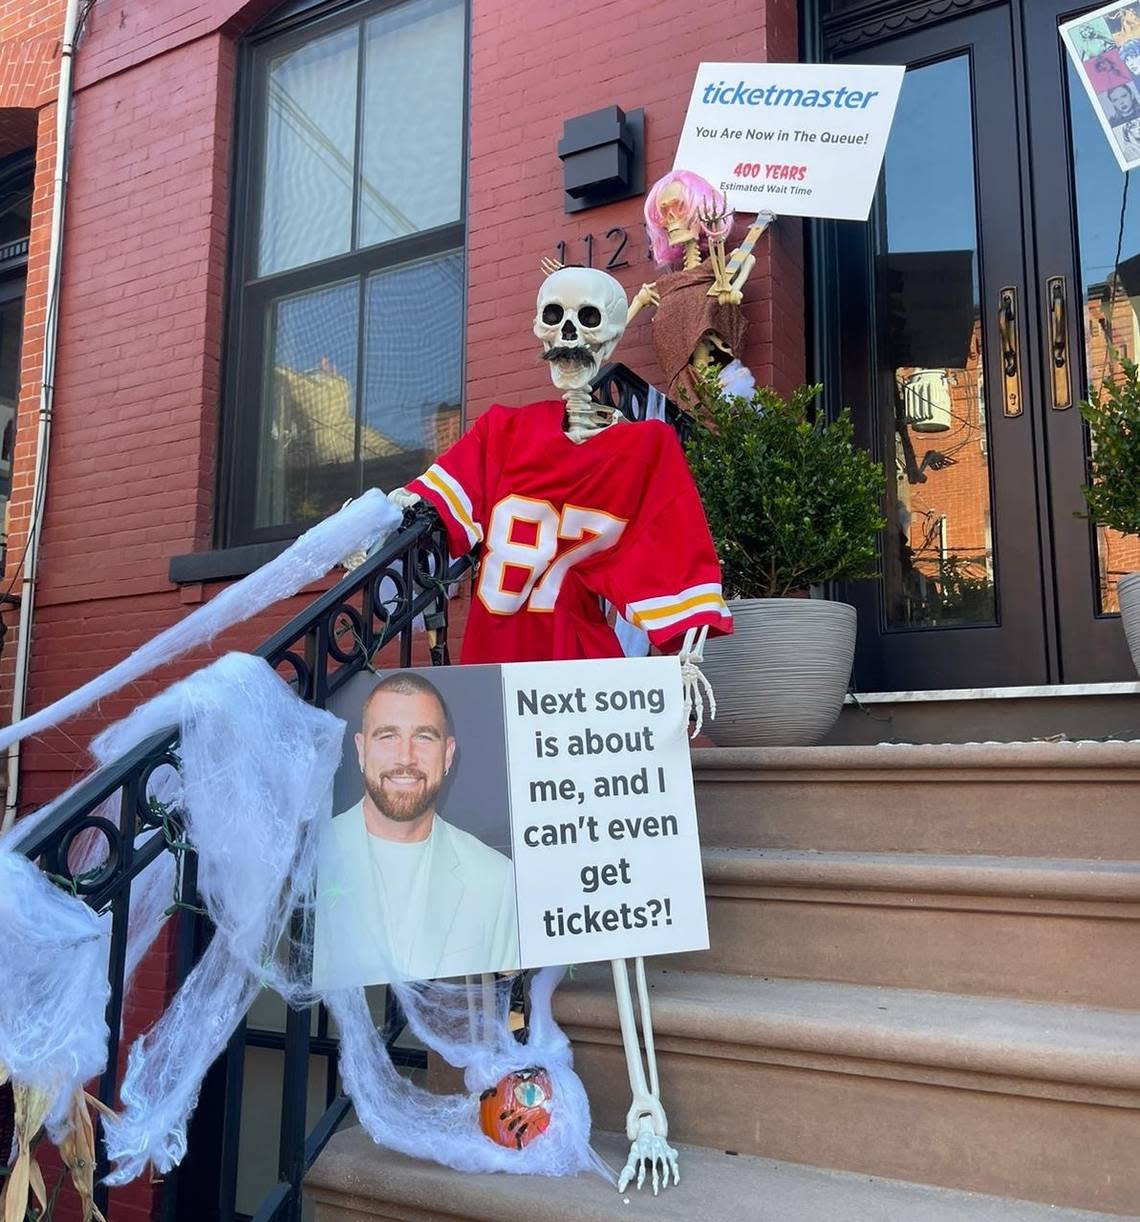 Chiefs fan Jeremy Adkins shared this Halloween scene from where he lives now … in Hoboken, N.J.